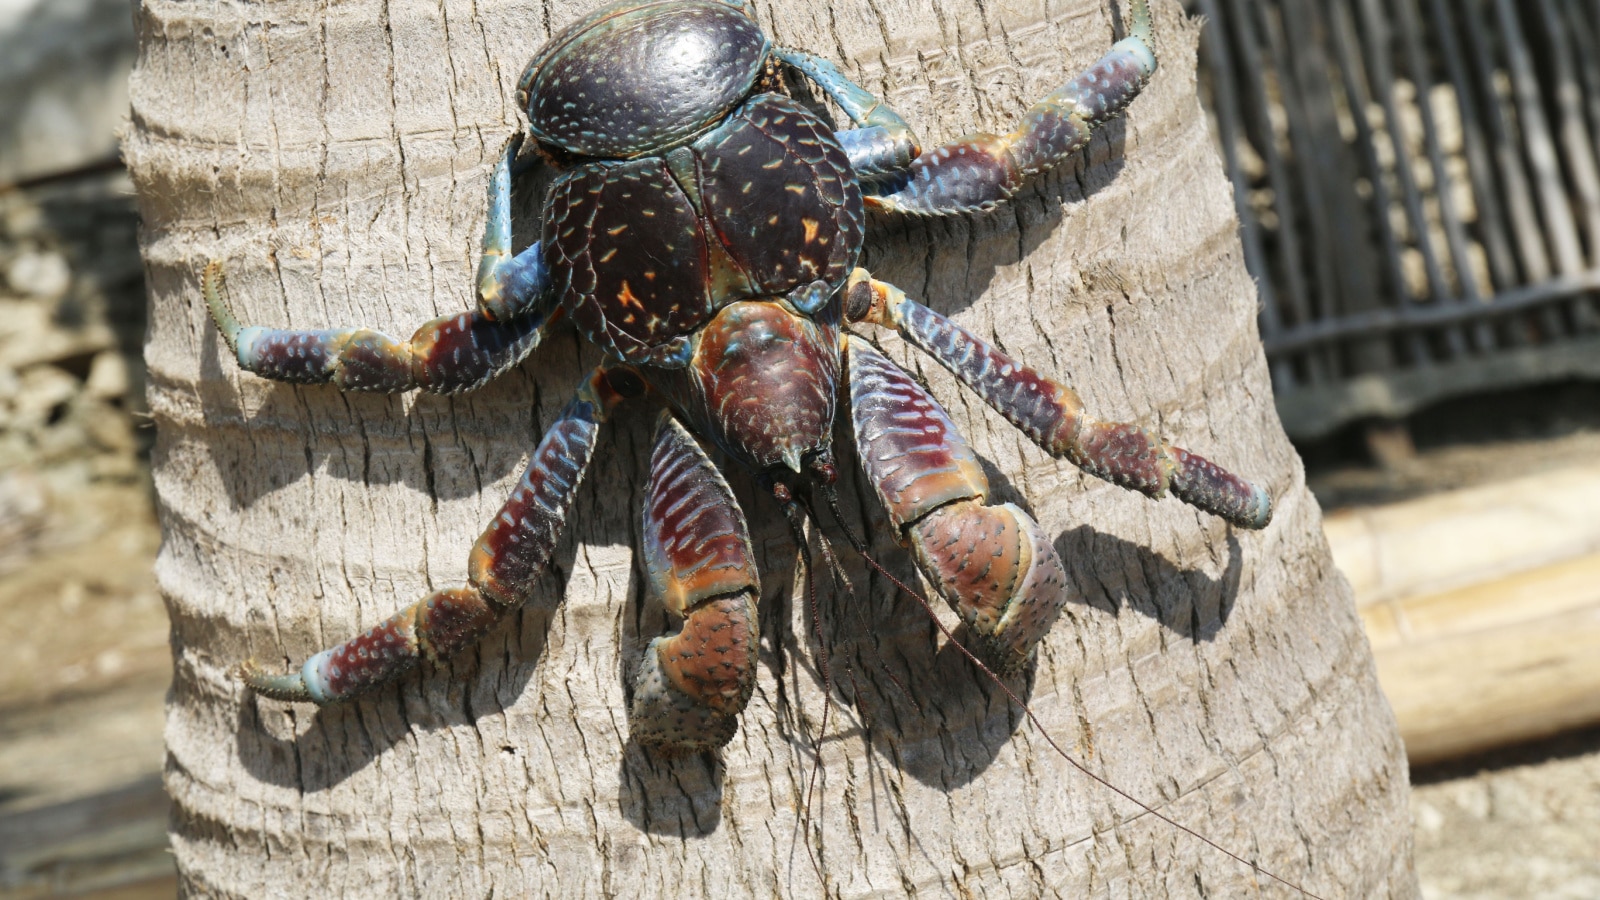 Coconut crab, an iconic animal of the Batanes islands in Philippines. The coconut crab is also known as the robber crab or palm thief.